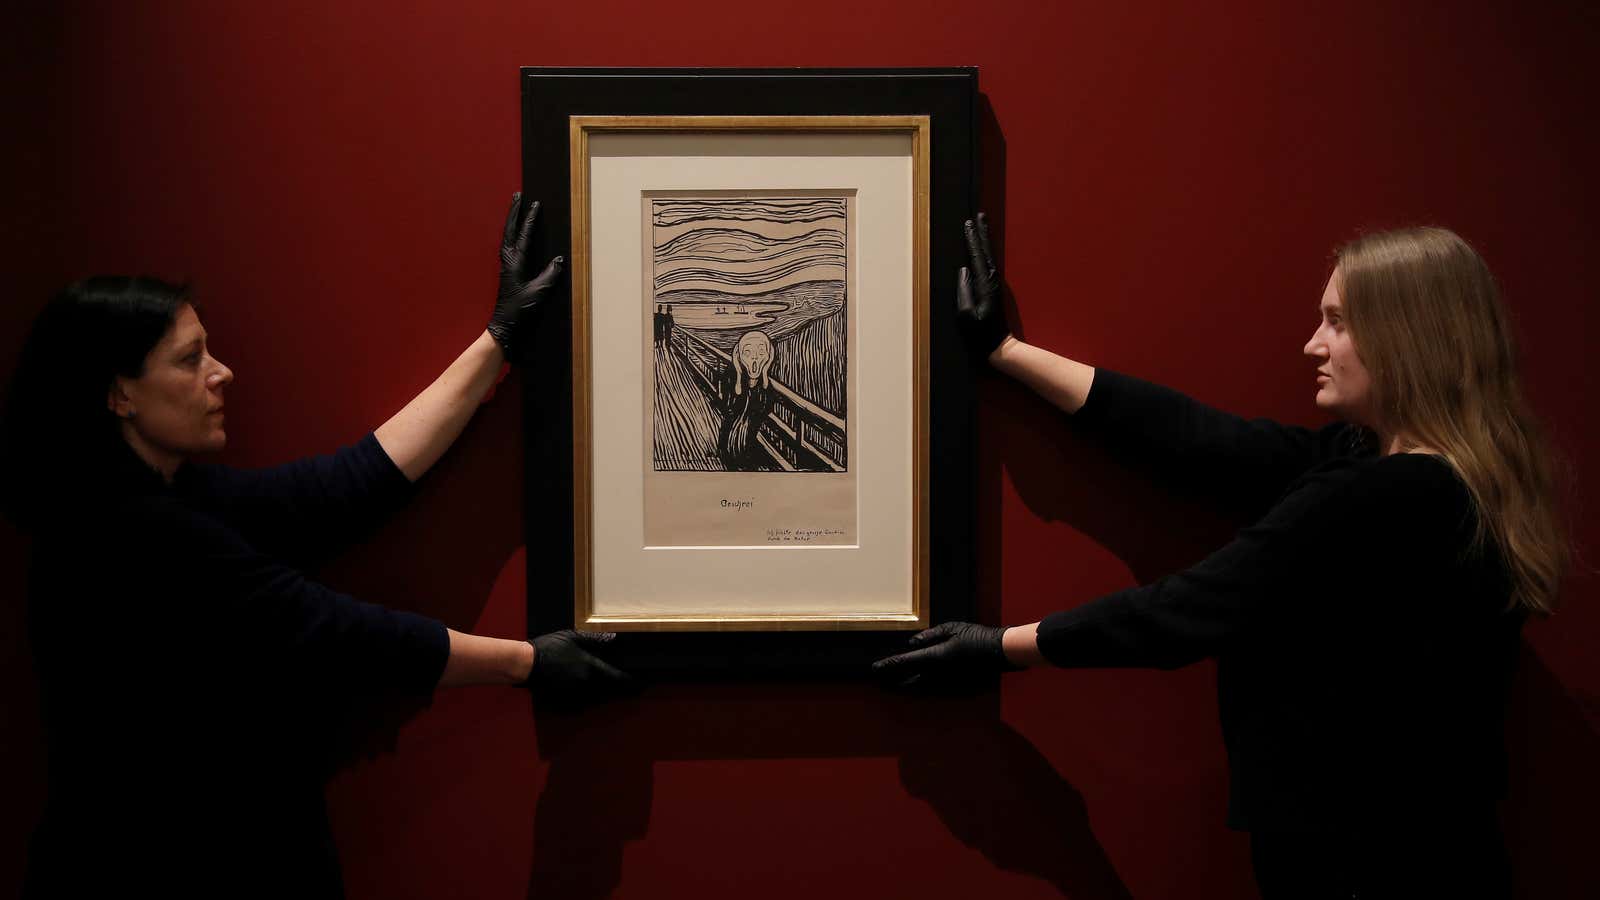 British Museum workers hang the black and white lithograph.